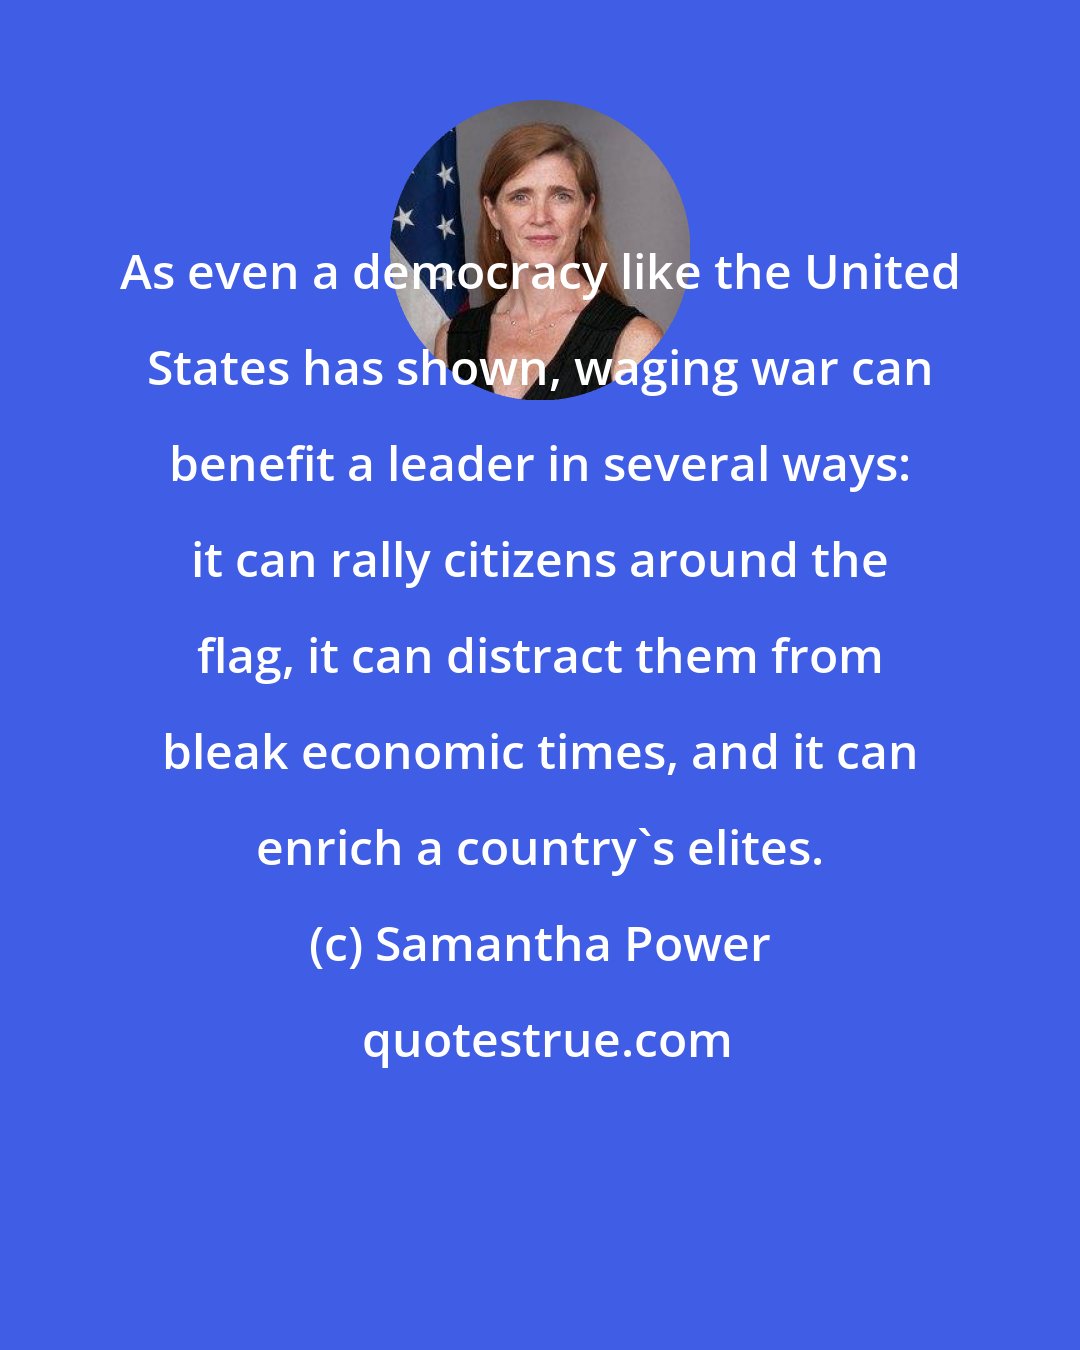 Samantha Power: As even a democracy like the United States has shown, waging war can benefit a leader in several ways: it can rally citizens around the flag, it can distract them from bleak economic times, and it can enrich a country's elites.